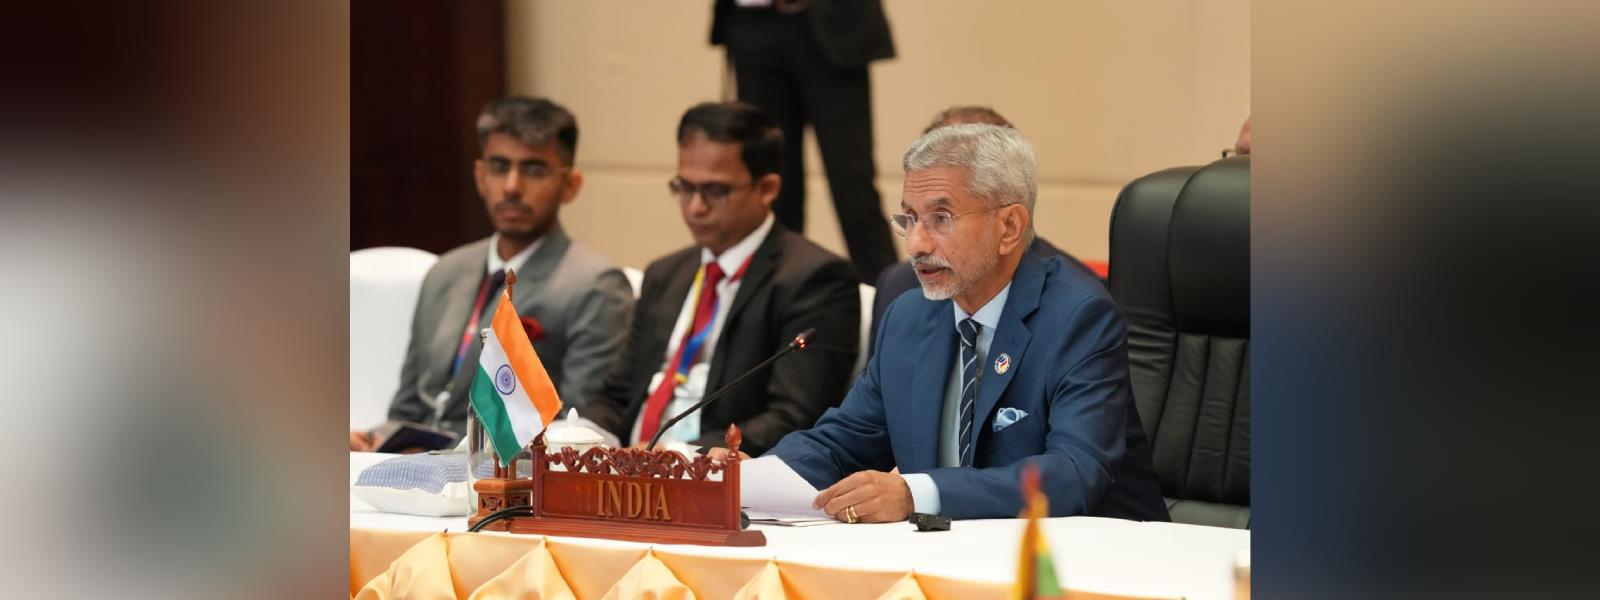 External Affairs Minister Dr. S. Jaishankar participated in a ASEAN-India Foreign Ministers’ Meeting in Vientiane